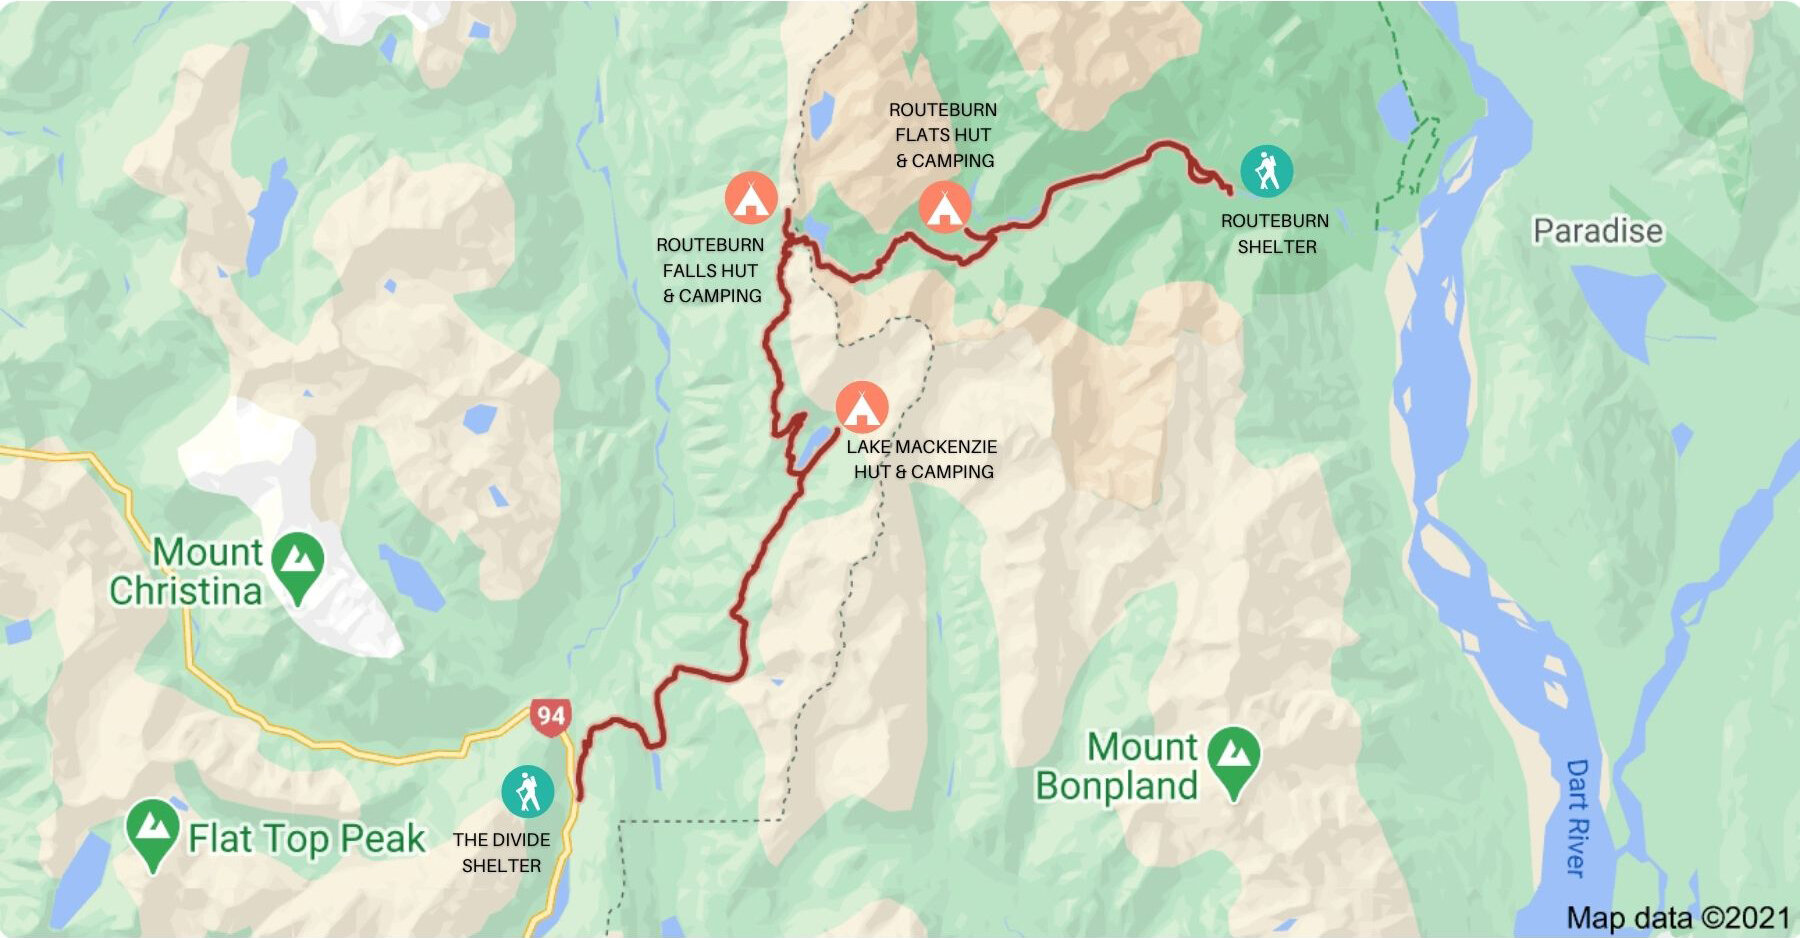 Routeburn Track Map | Two Wandering Soles